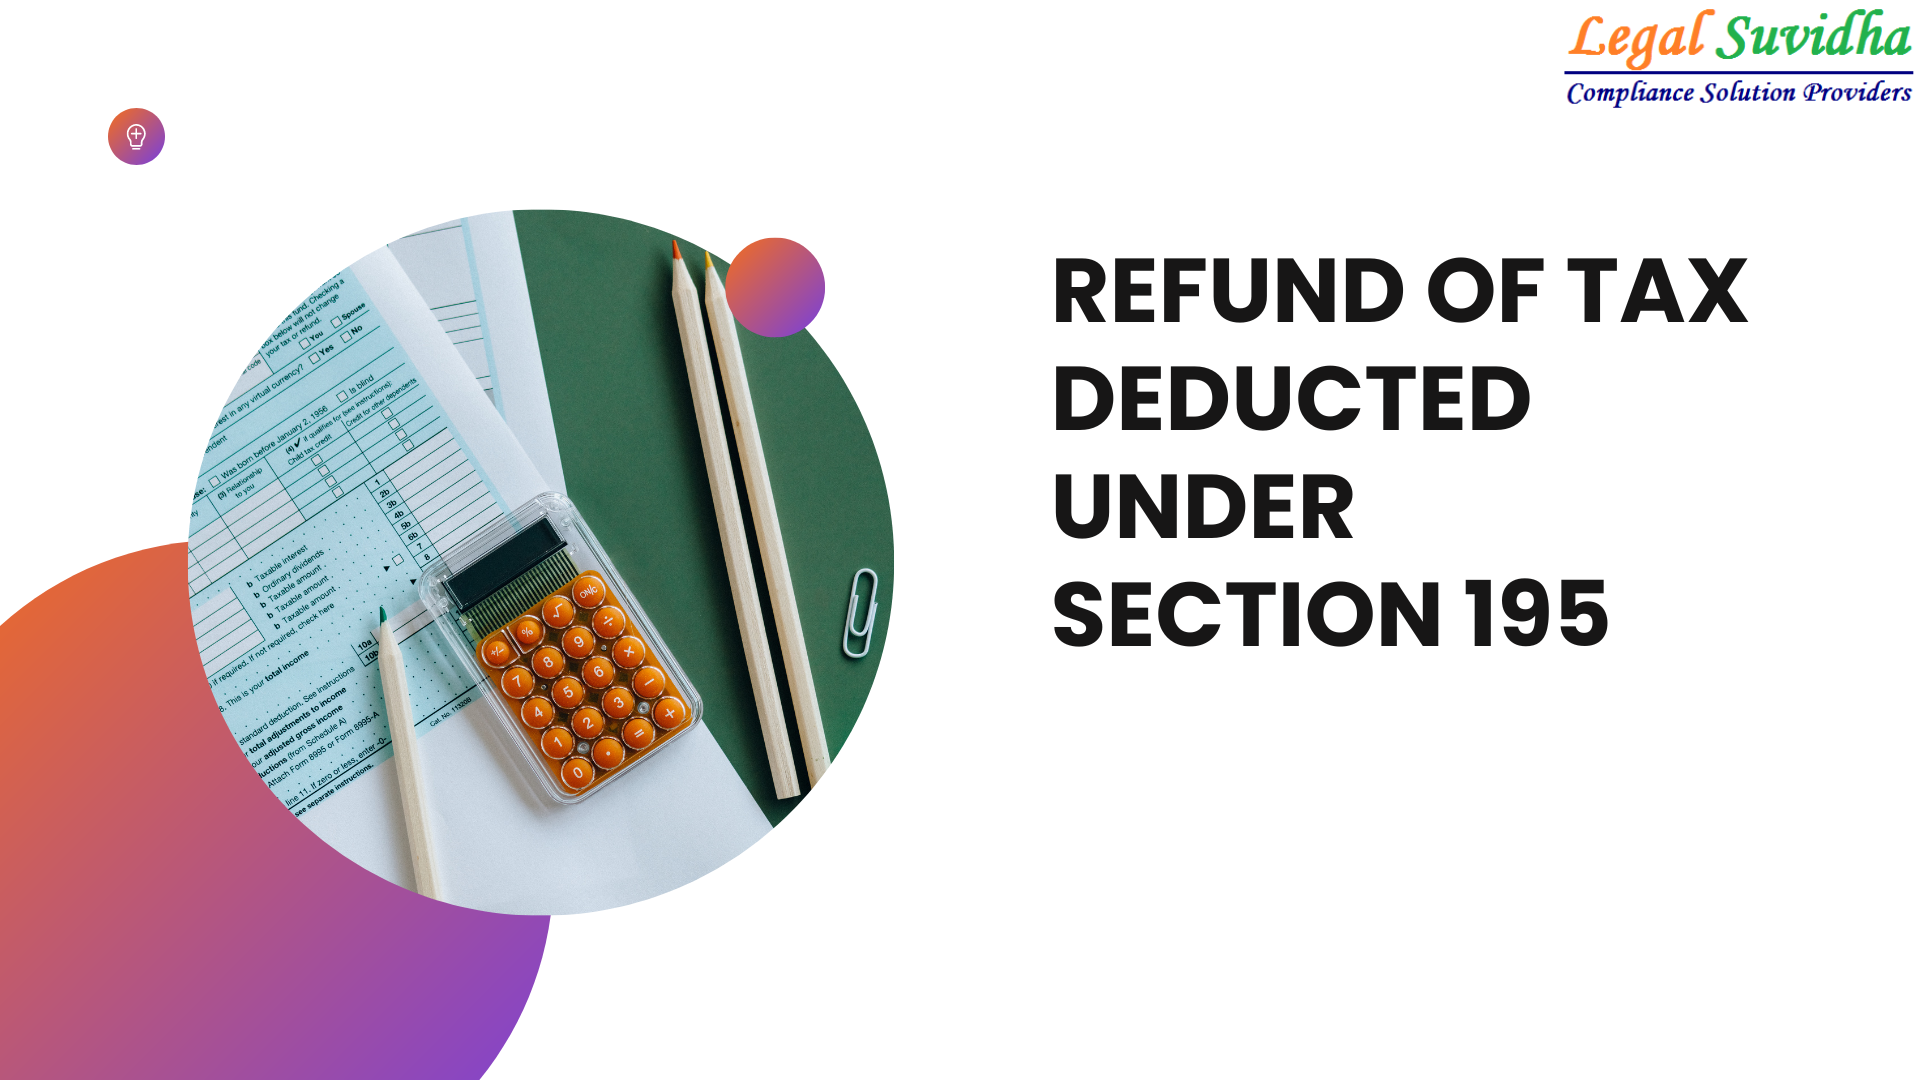 Refund of Tax Deducted